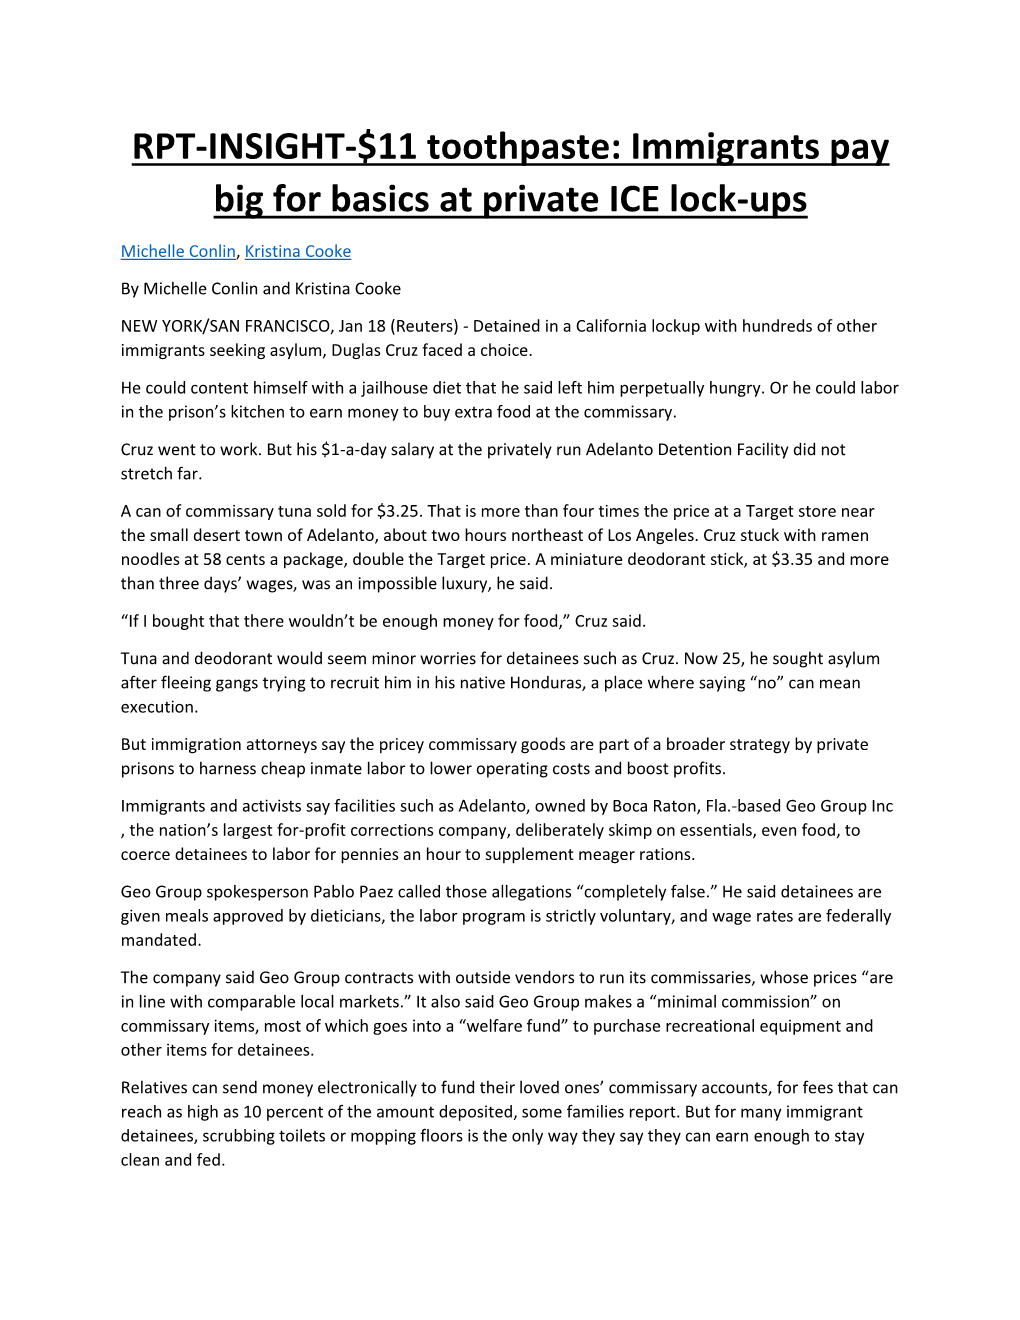 Immigrants Pay Big for Basics at Private ICE Lock-Ups